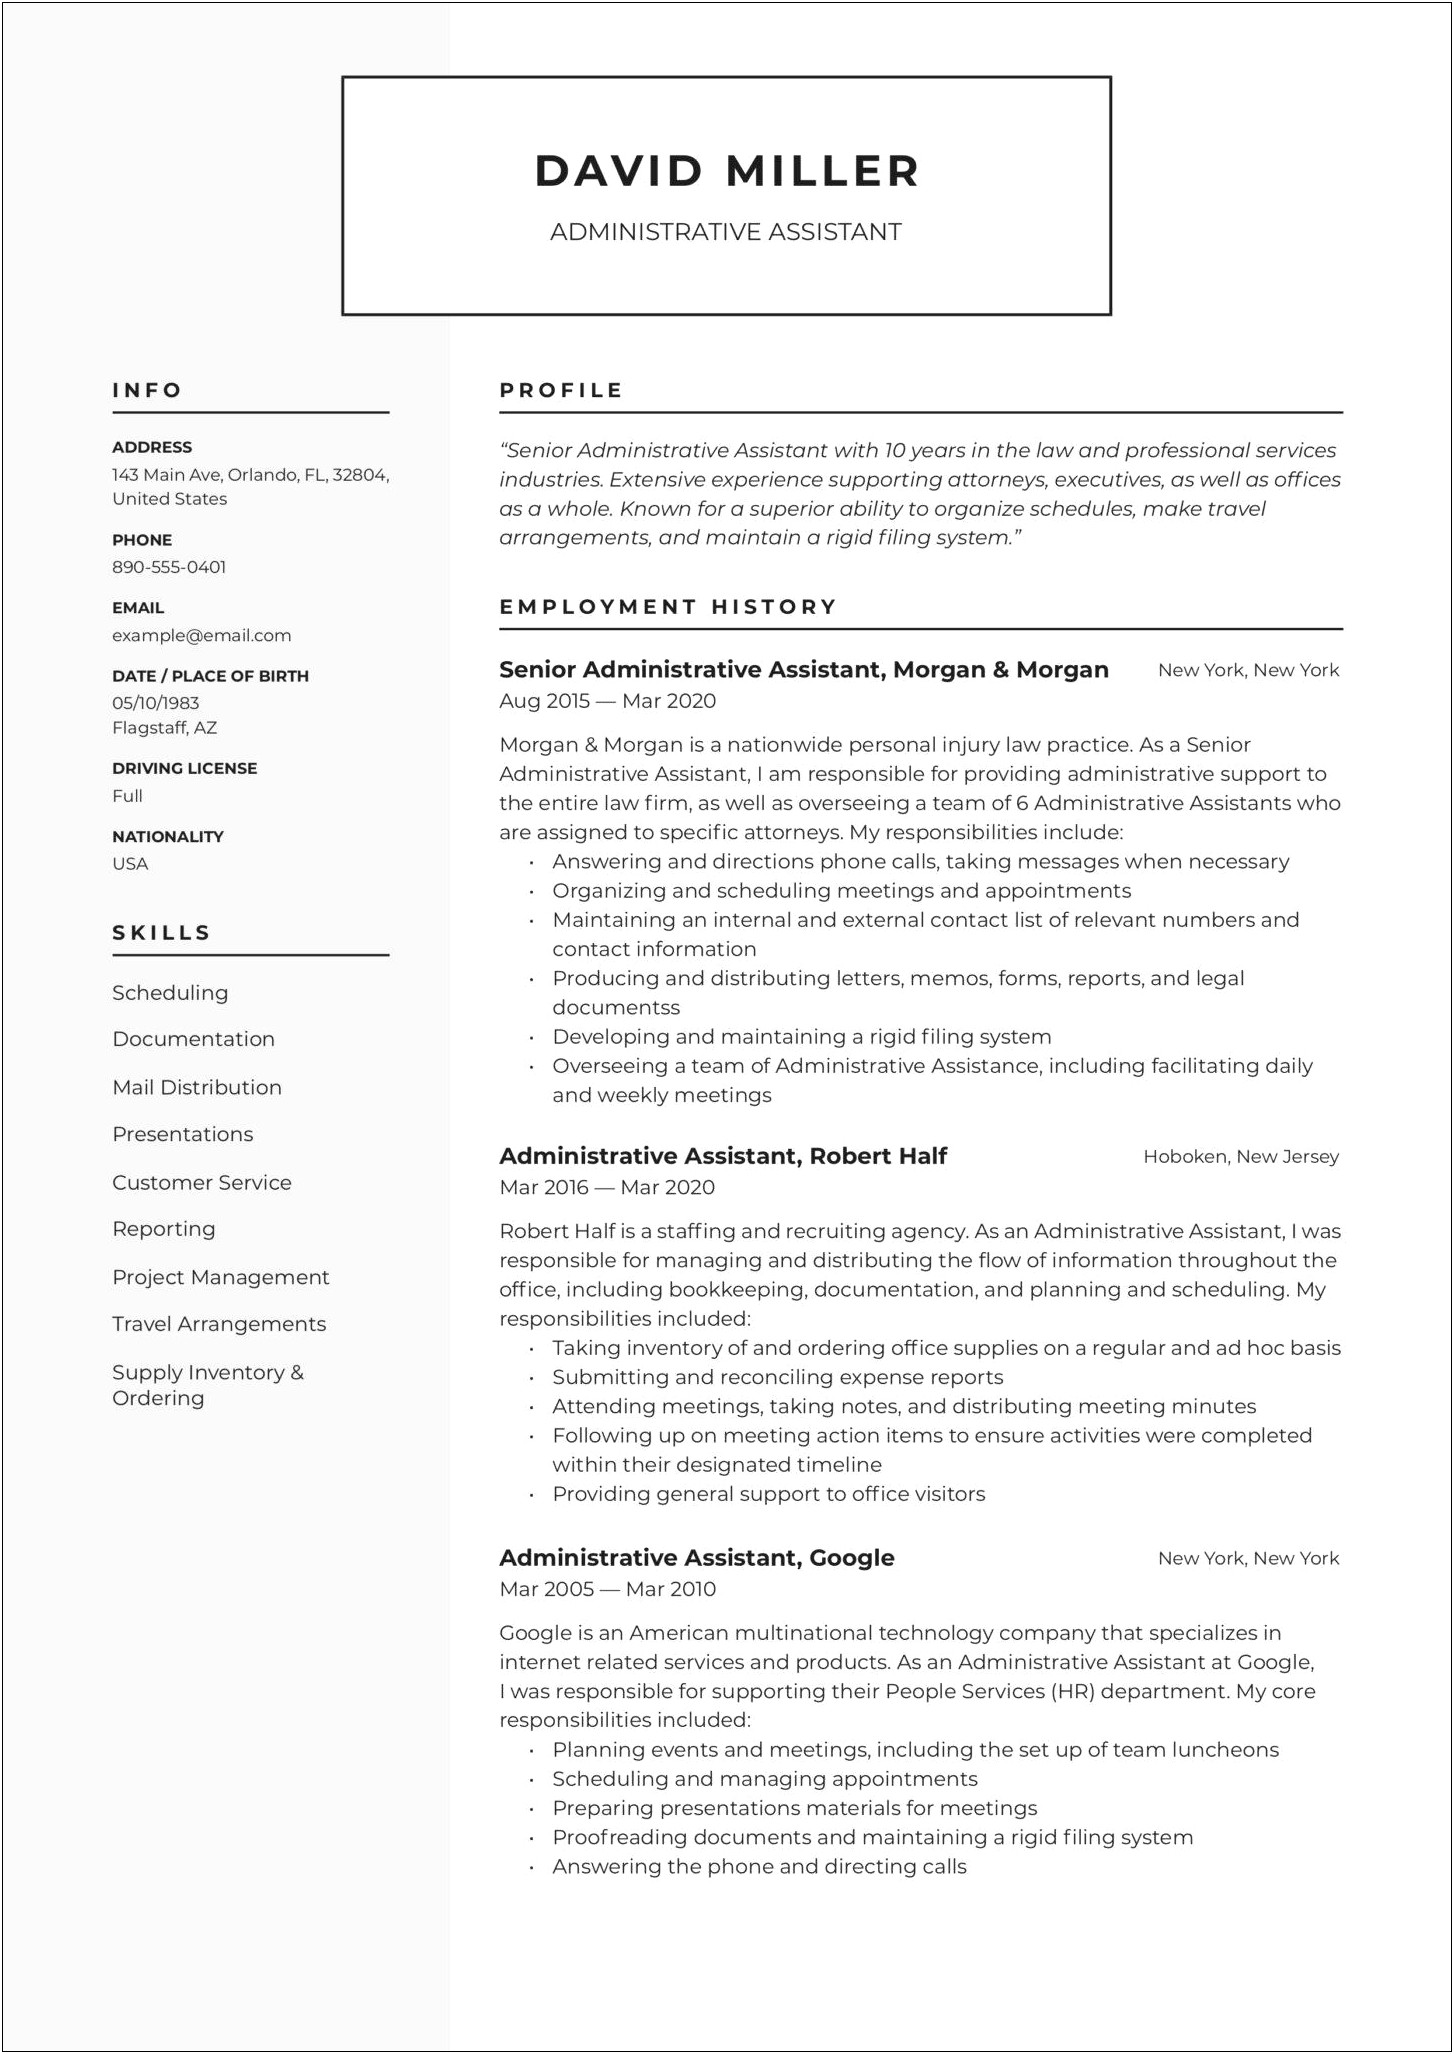 Administrative Assistant Summary Of Qualifications Resume